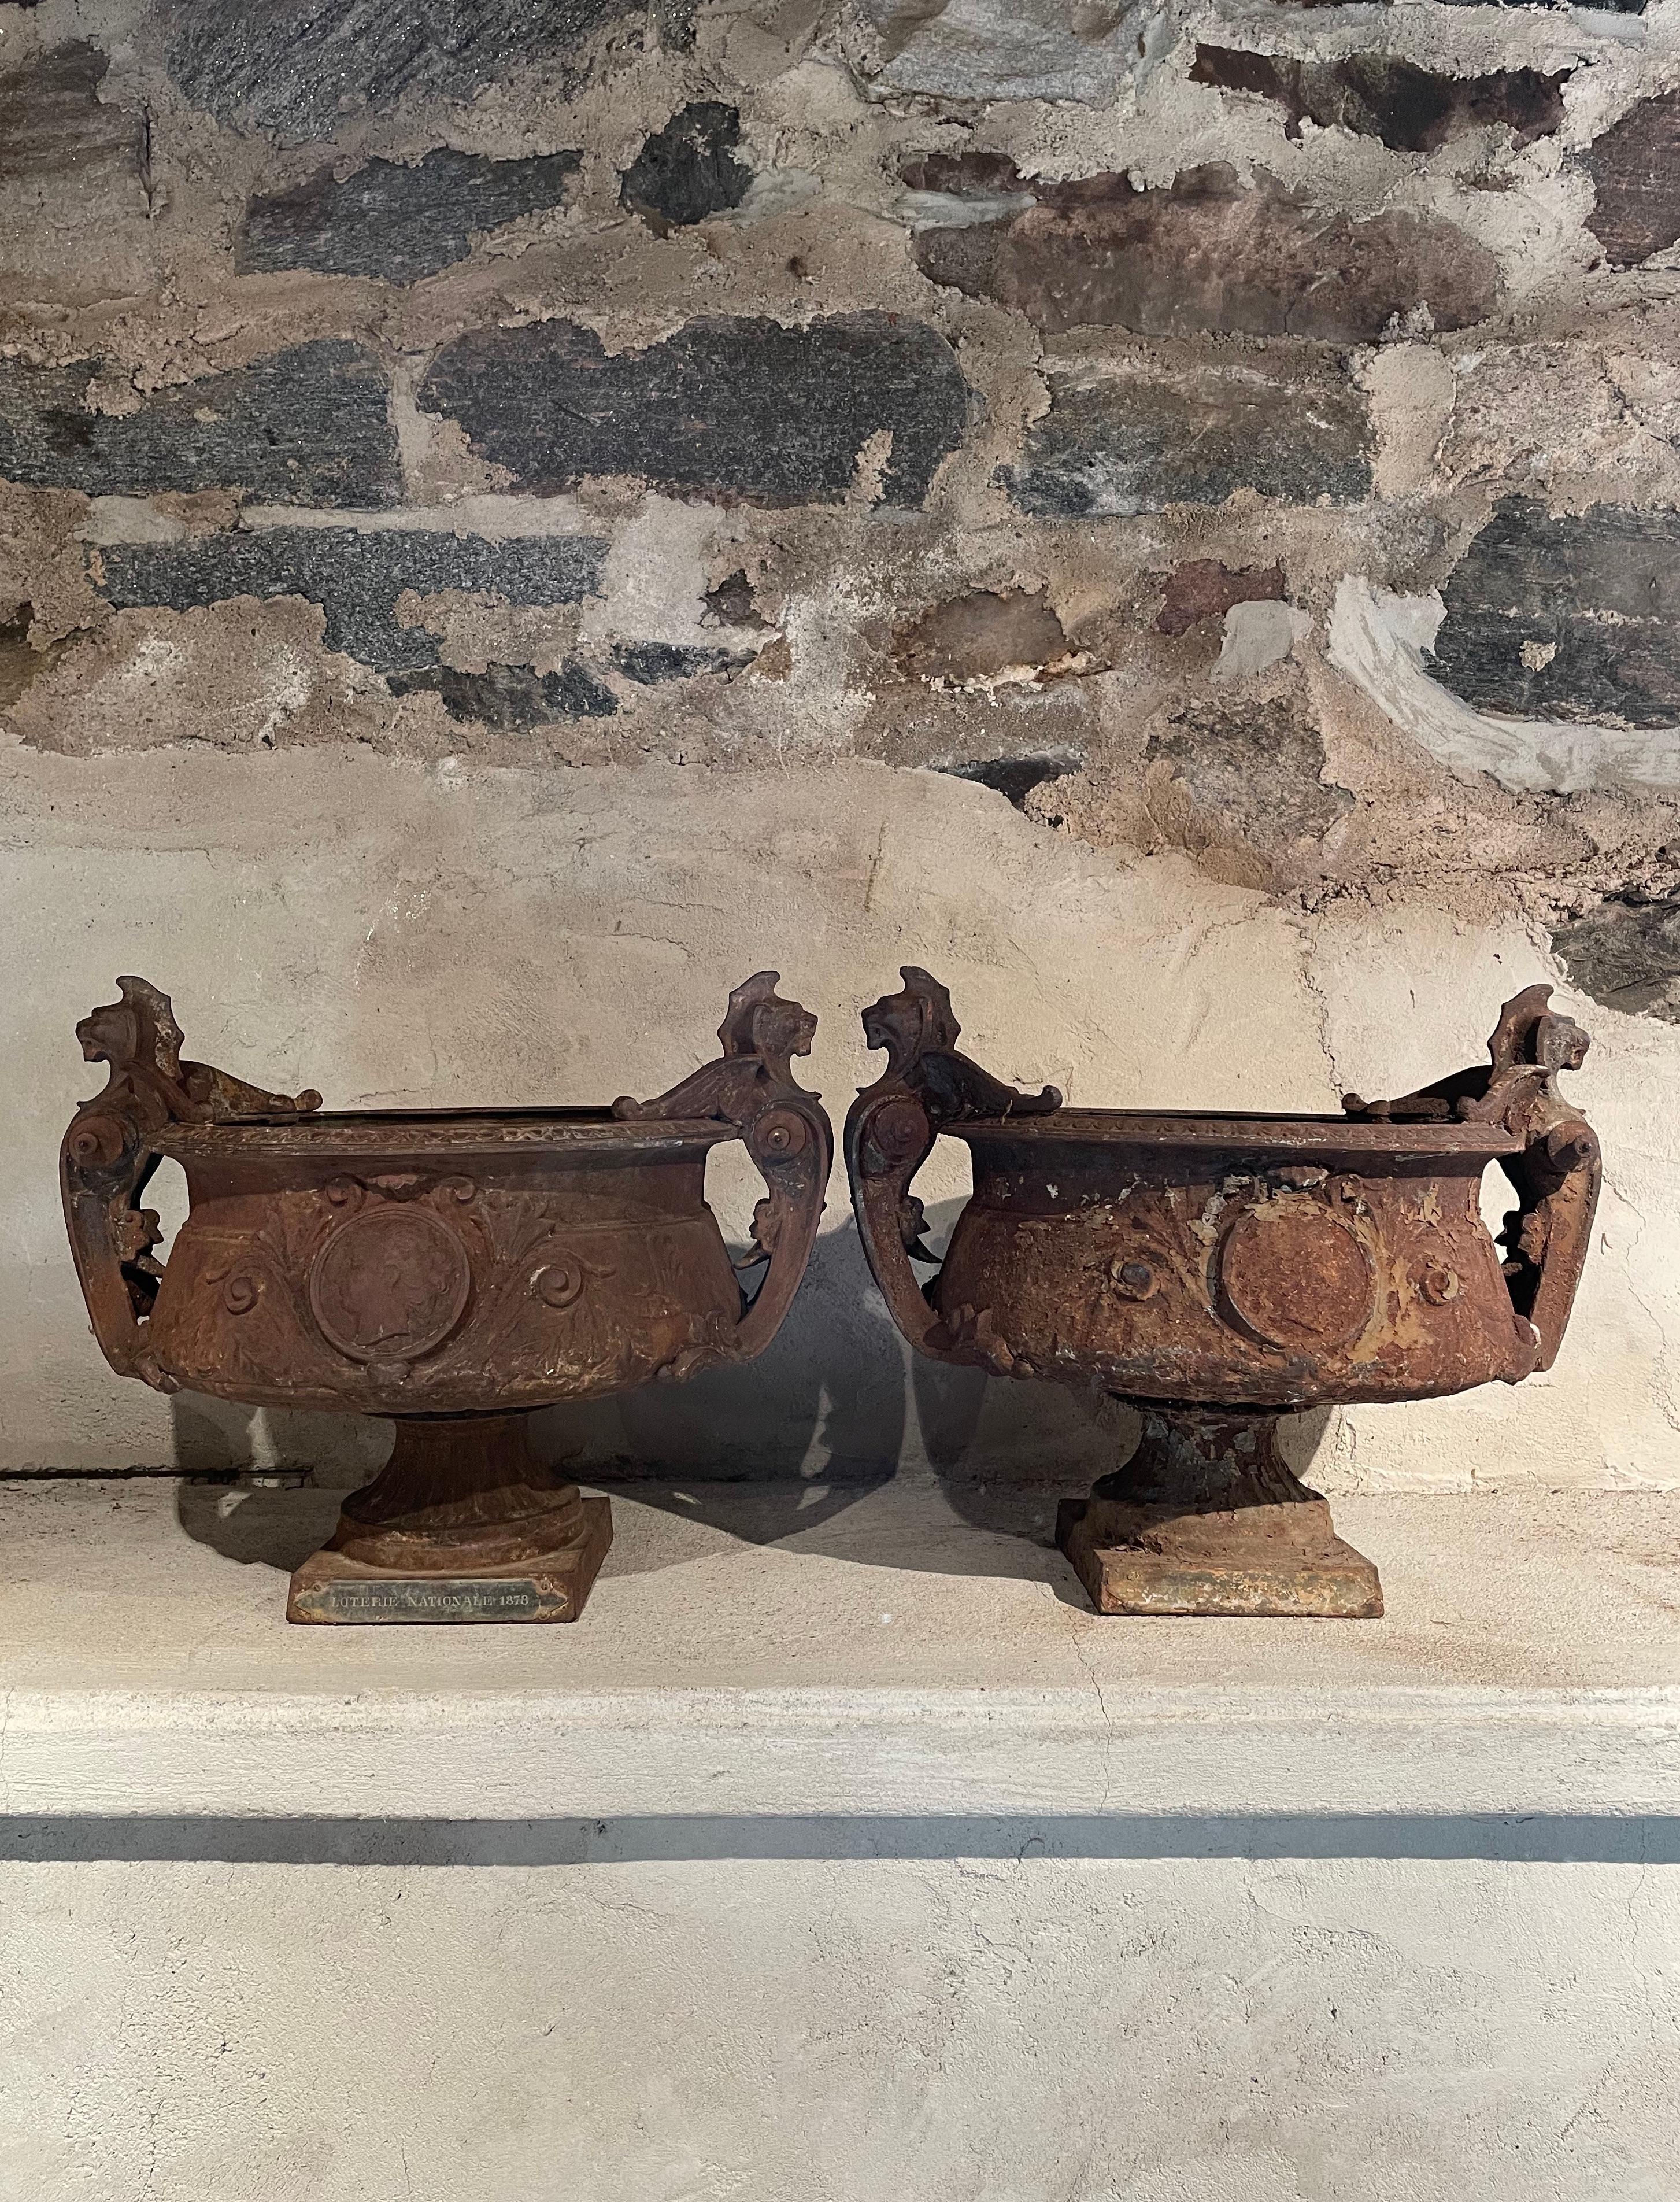 We have never come across this model of urn before and they are simply wonderful! Featuring winged griffin handles riveted to the squat bodies of the urns, the bowls have central medallions of “Marianne,” the iconic emblem of France and elegant